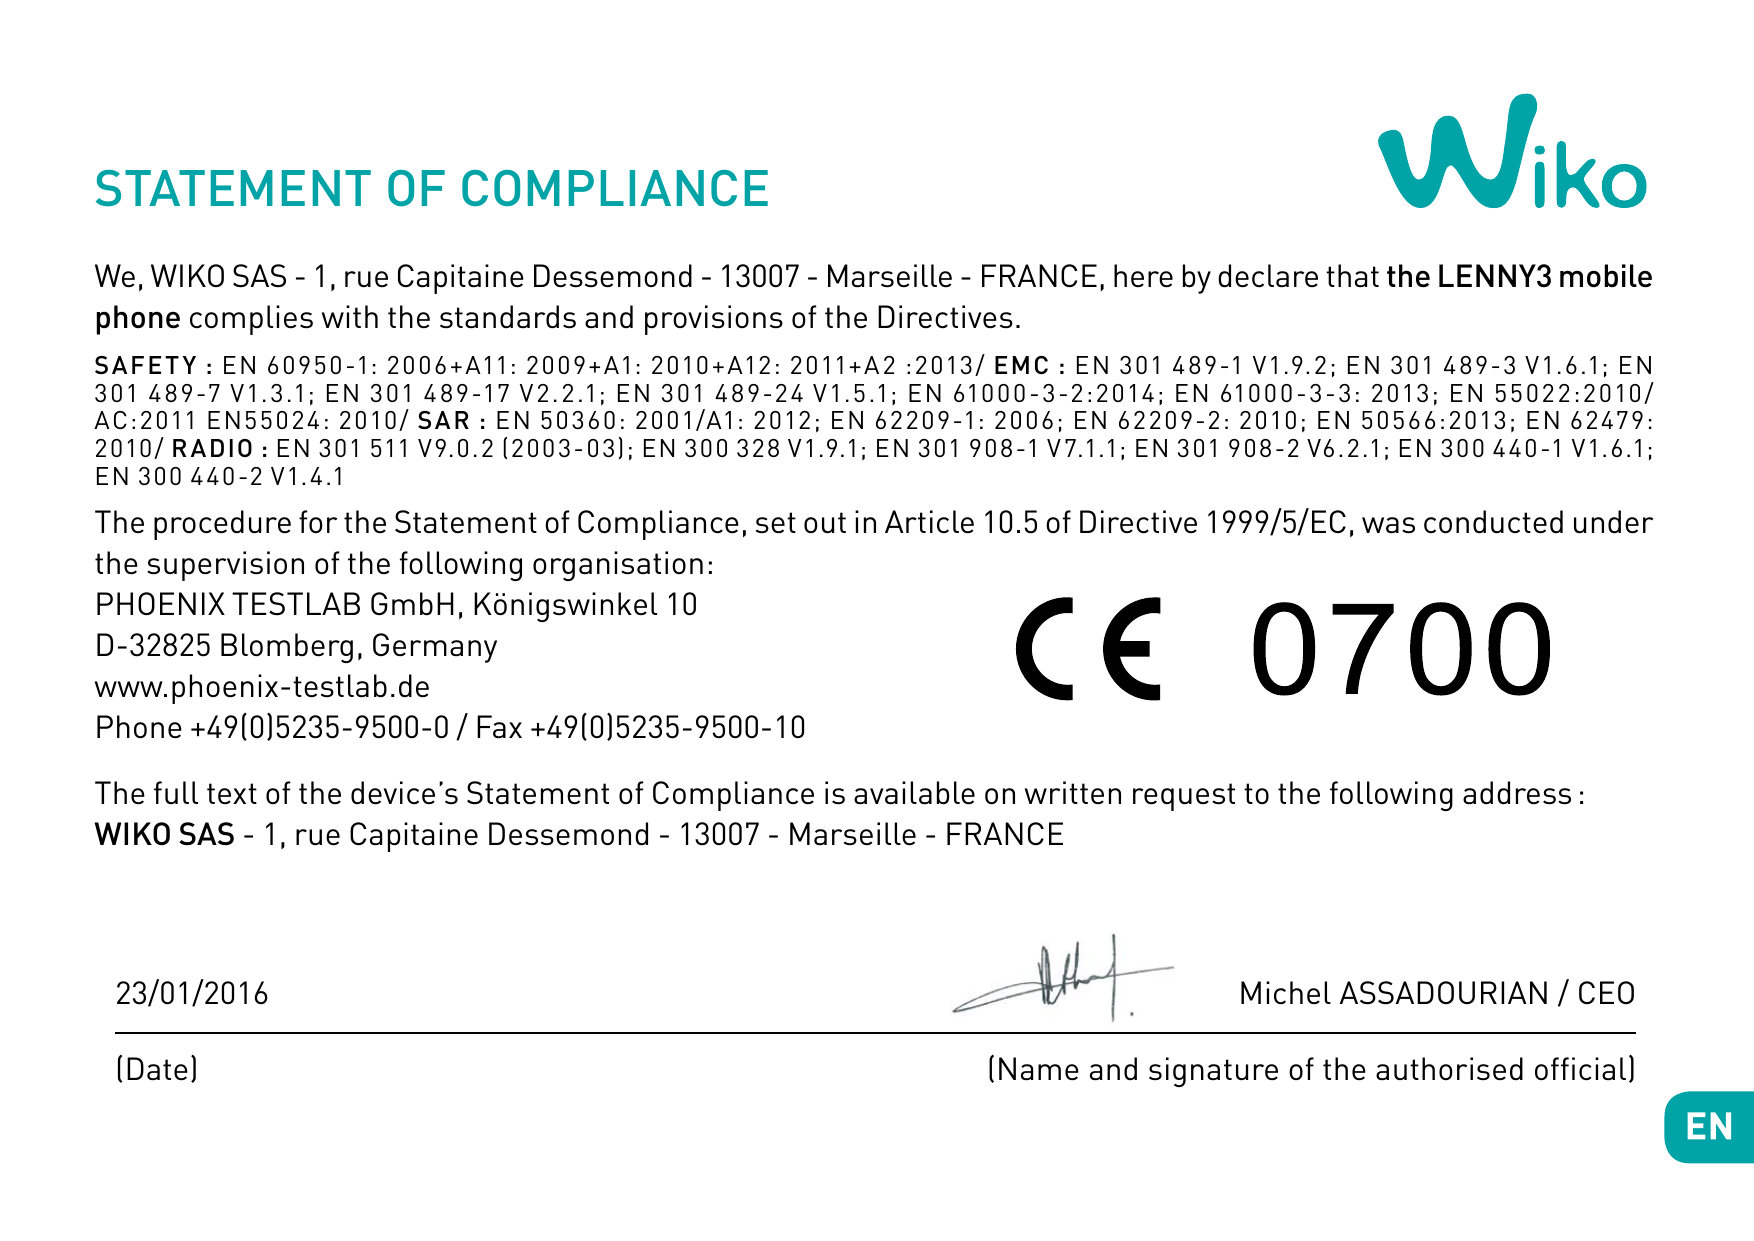 STATEMENT OF COMPLIANCEWe, WIKO SAS - 1, rue Capitaine Dessemond - 13007 - Marseille - FRANCE, here by declare that the LENNY3 m